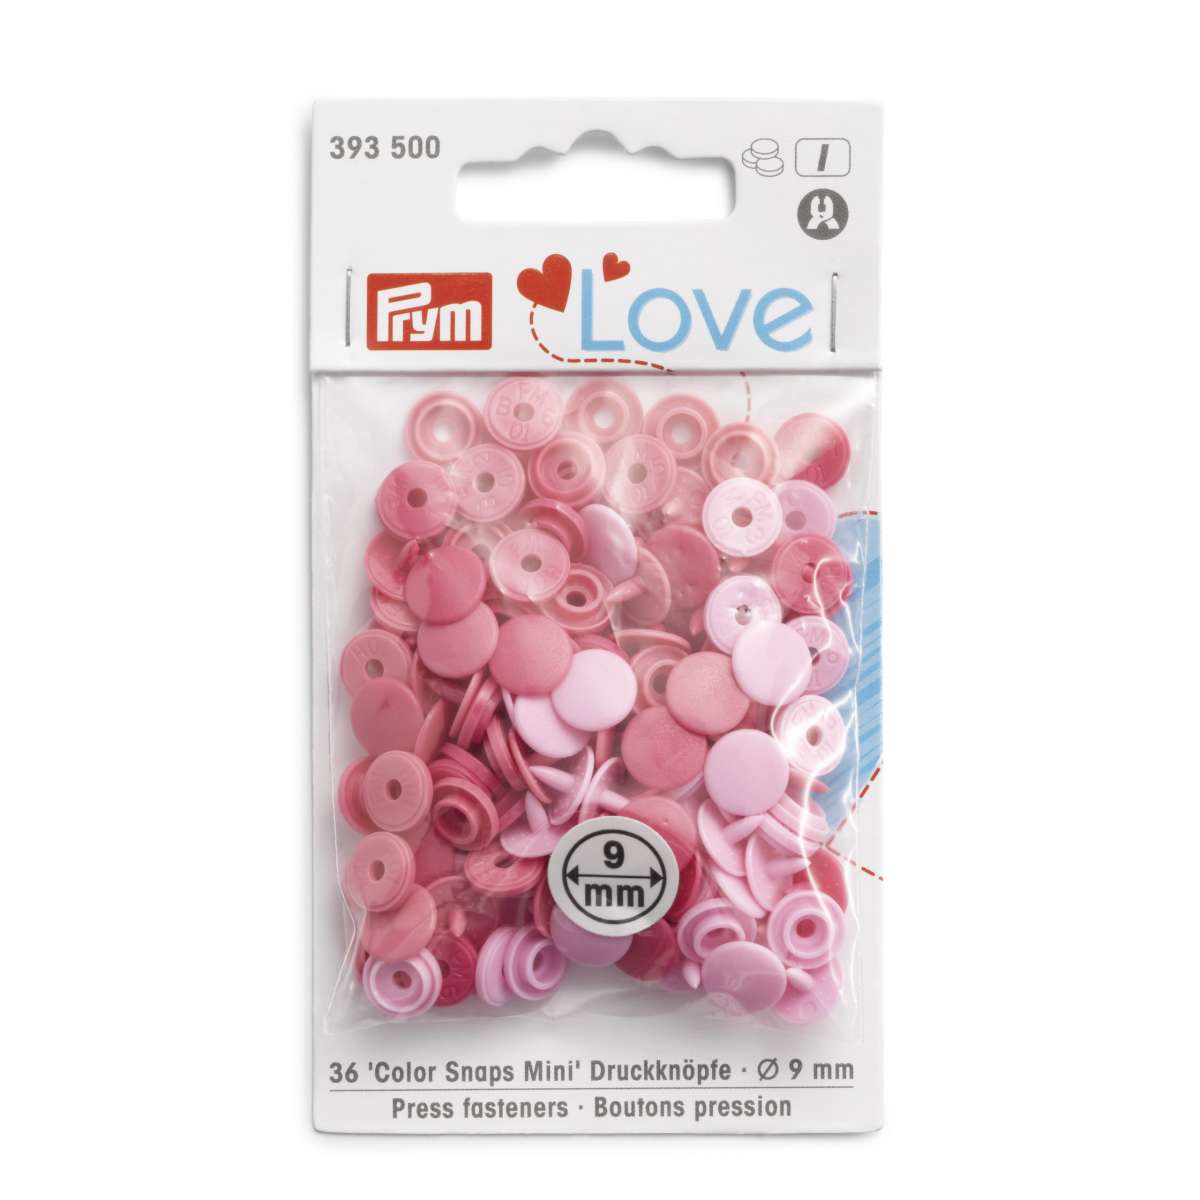 Prym Love Press fasteners Colour Snaps Mini, 9 mm, in shades of pink